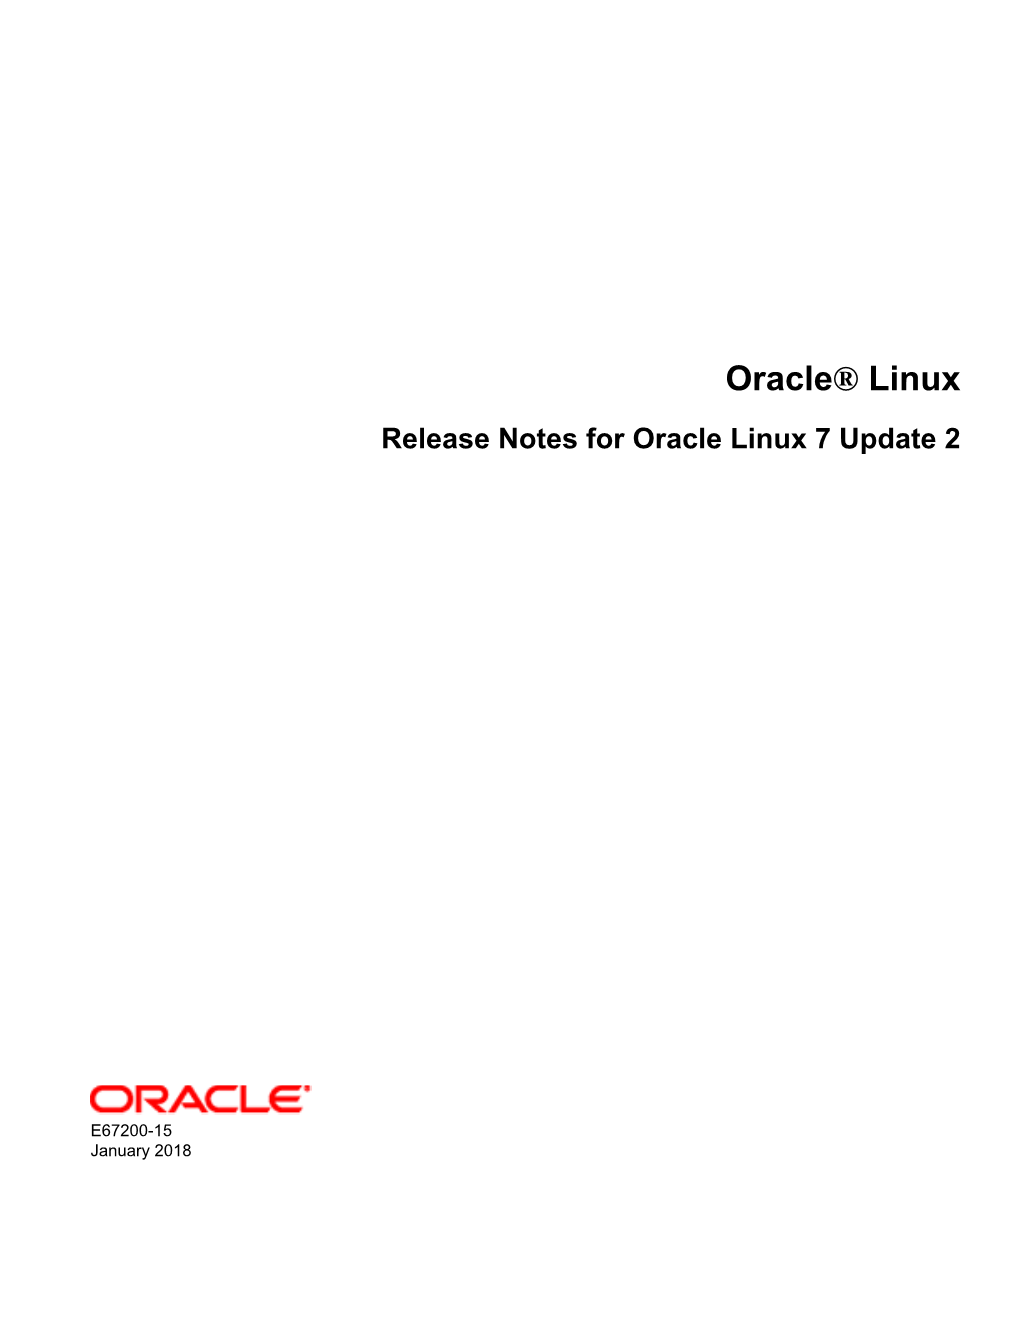 Oracle® Linux Release Notes for Oracle Linux 7 Update 2